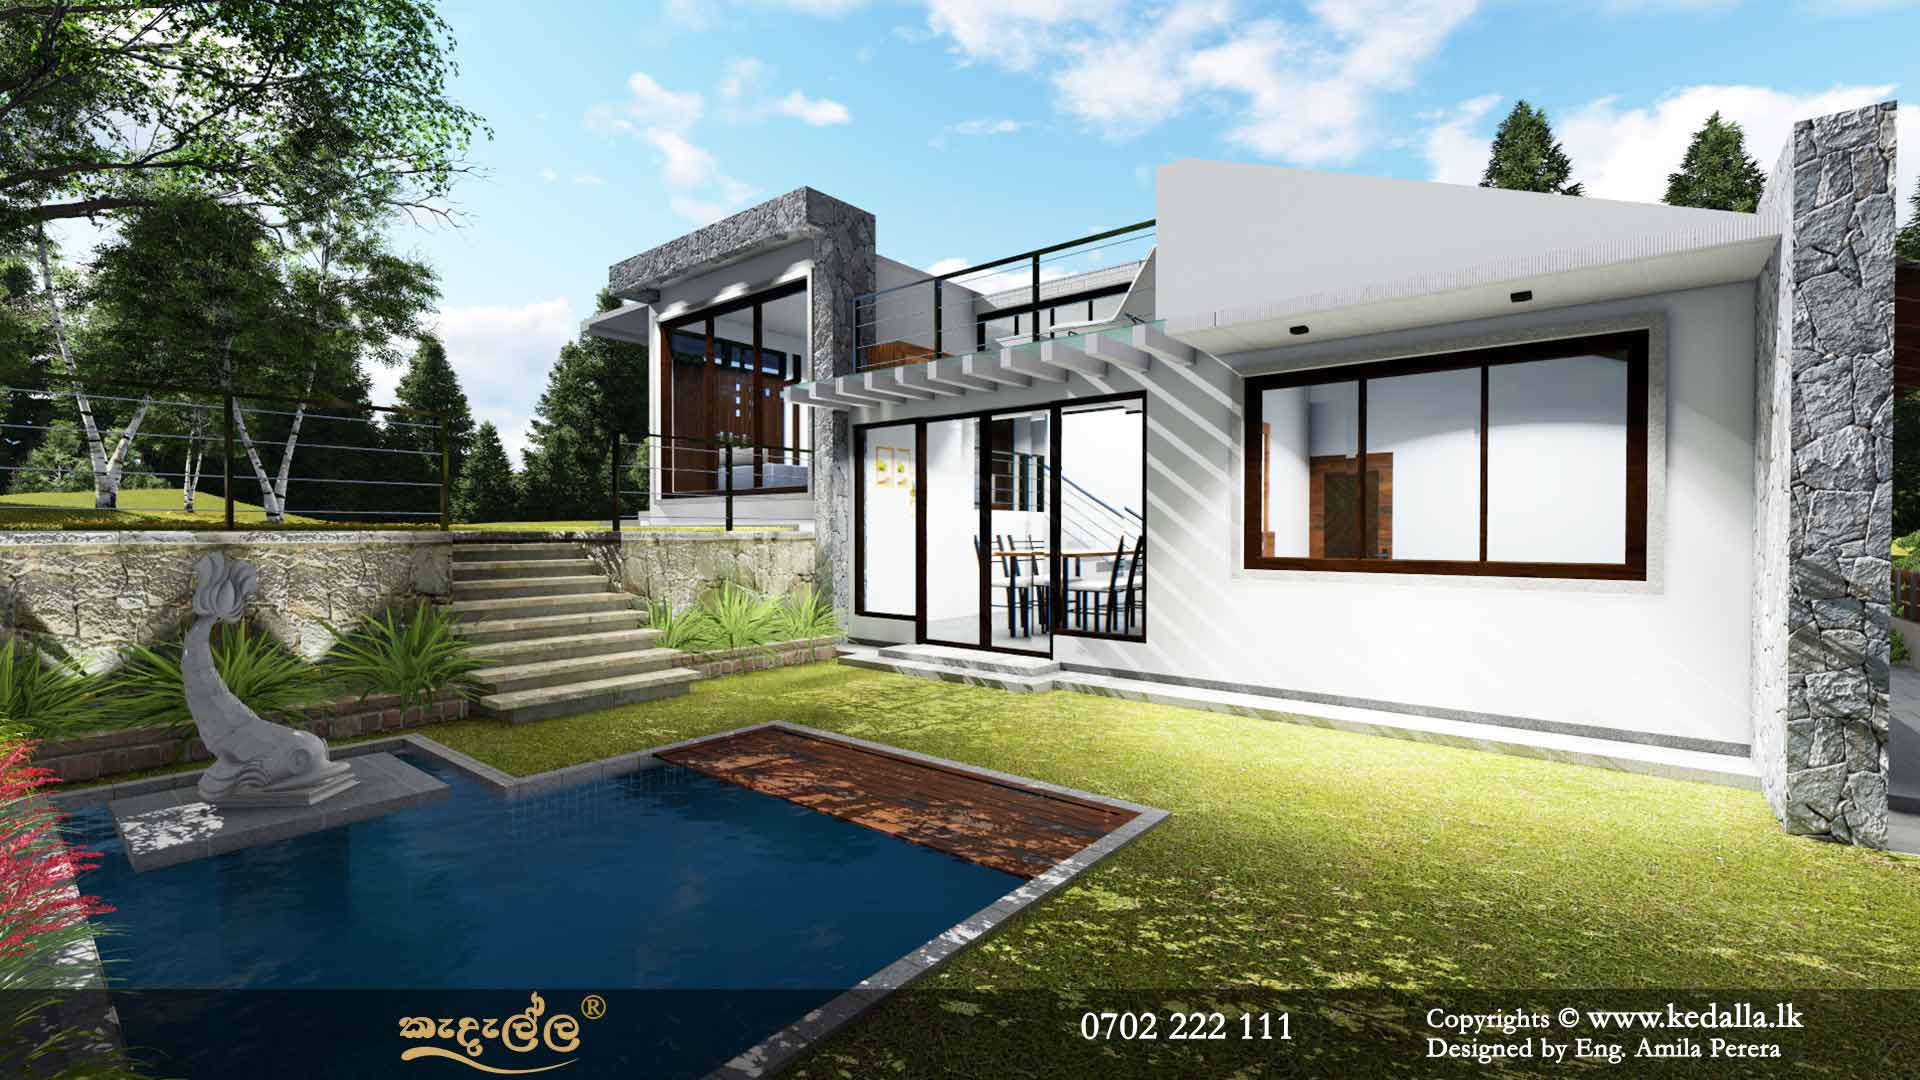 Beautifull Single Story House Plan with Swimming pool designed by building designers in kandy Sri Lanka